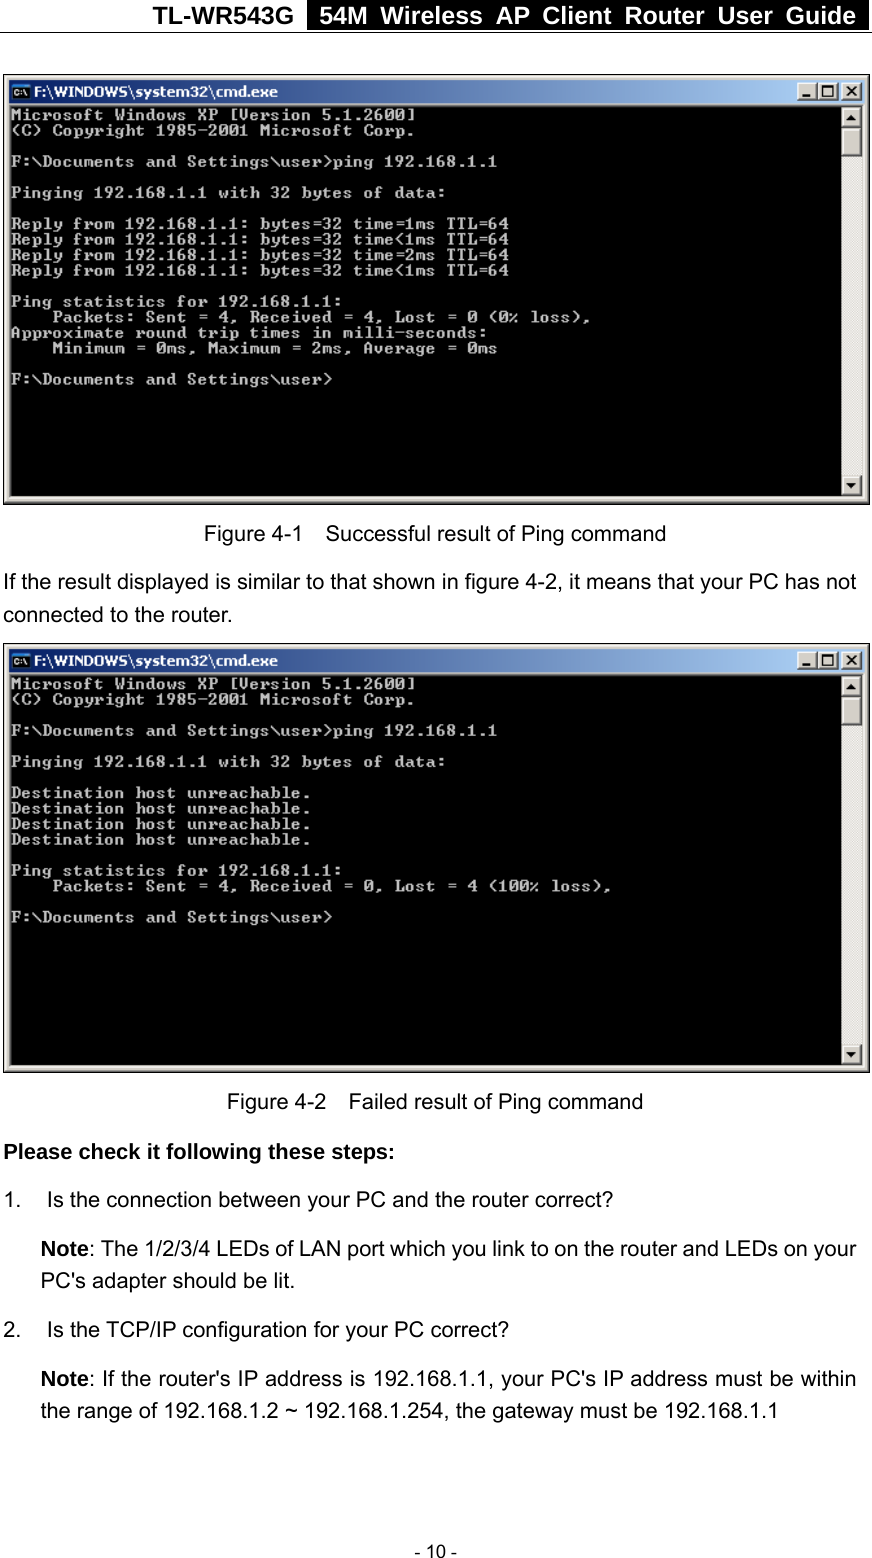 TL-WR543G   54M Wireless AP Client Router User Guide    Figure 4-1    Successful result of Ping command If the result displayed is similar to that shown in figure 4-2, it means that your PC has not connected to the router.     Figure 4-2    Failed result of Ping command Please check it following these steps: 1.  Is the connection between your PC and the router correct? Note: The 1/2/3/4 LEDs of LAN port which you link to on the router and LEDs on your PC&apos;s adapter should be lit. 2. Is the TCP/IP configuration for your PC correct? Note: If the router&apos;s IP address is 192.168.1.1, your PC&apos;s IP address must be within the range of 192.168.1.2 ~ 192.168.1.254, the gateway must be 192.168.1.1  - 10 - 